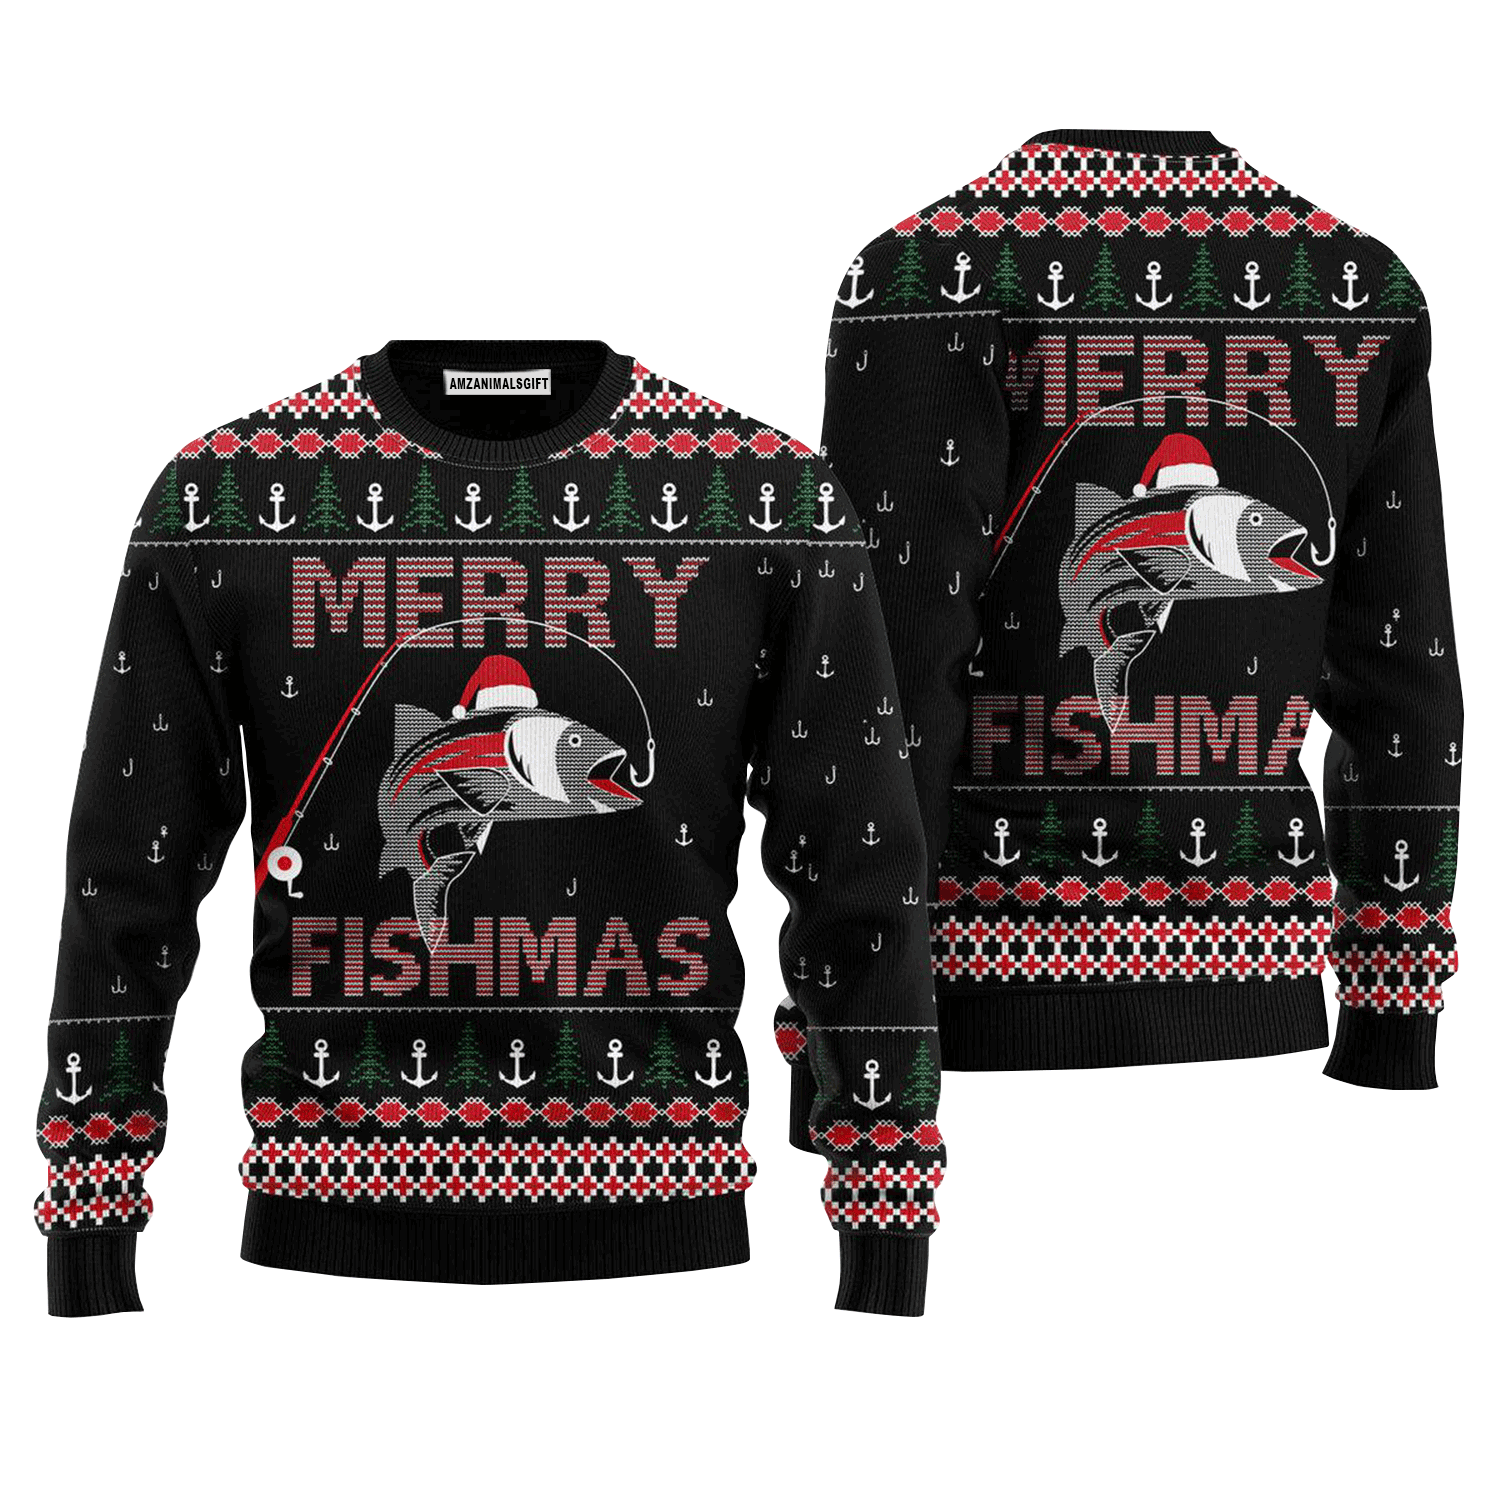 Merry Fishmas Sweater Christmas, Ugly Sweater For Men & Women, Perfect Outfit For Christmas New Year Autumn Winter